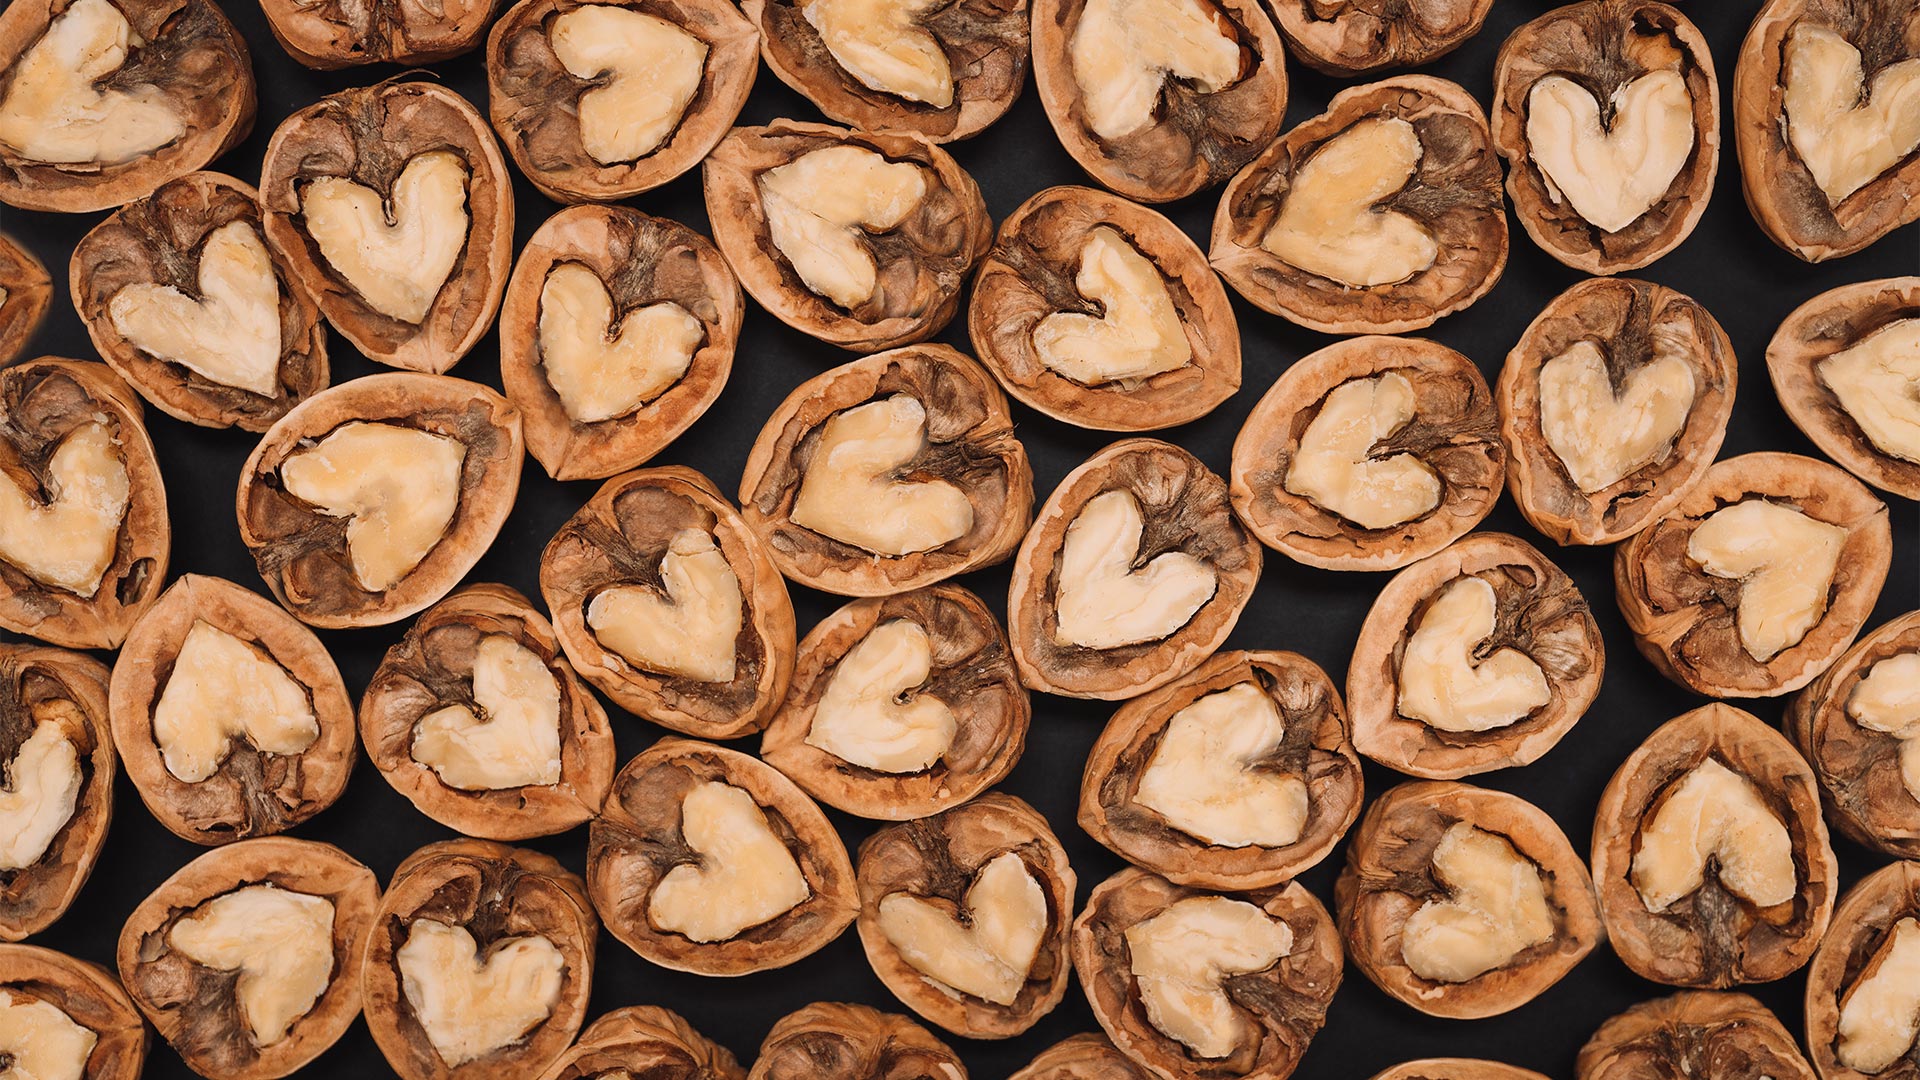 Can Eating Walnuts Improve Sperm Quality?